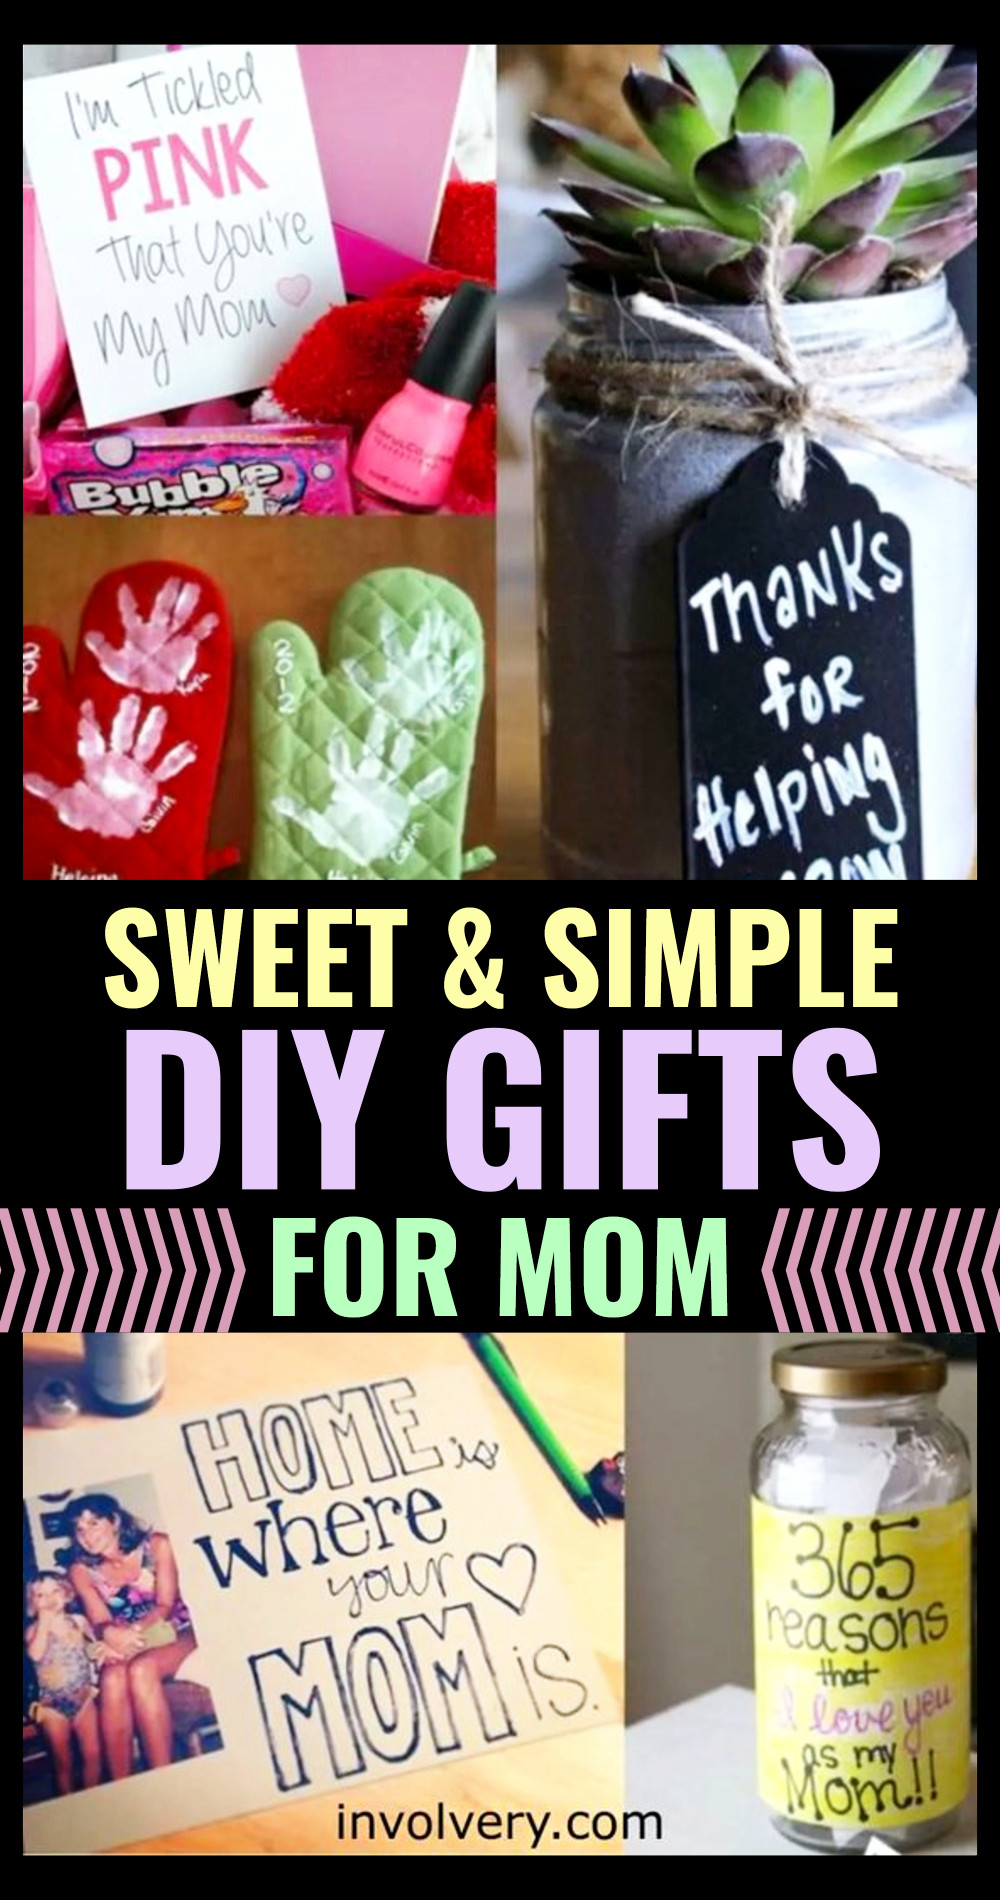 DIY gifts for mom